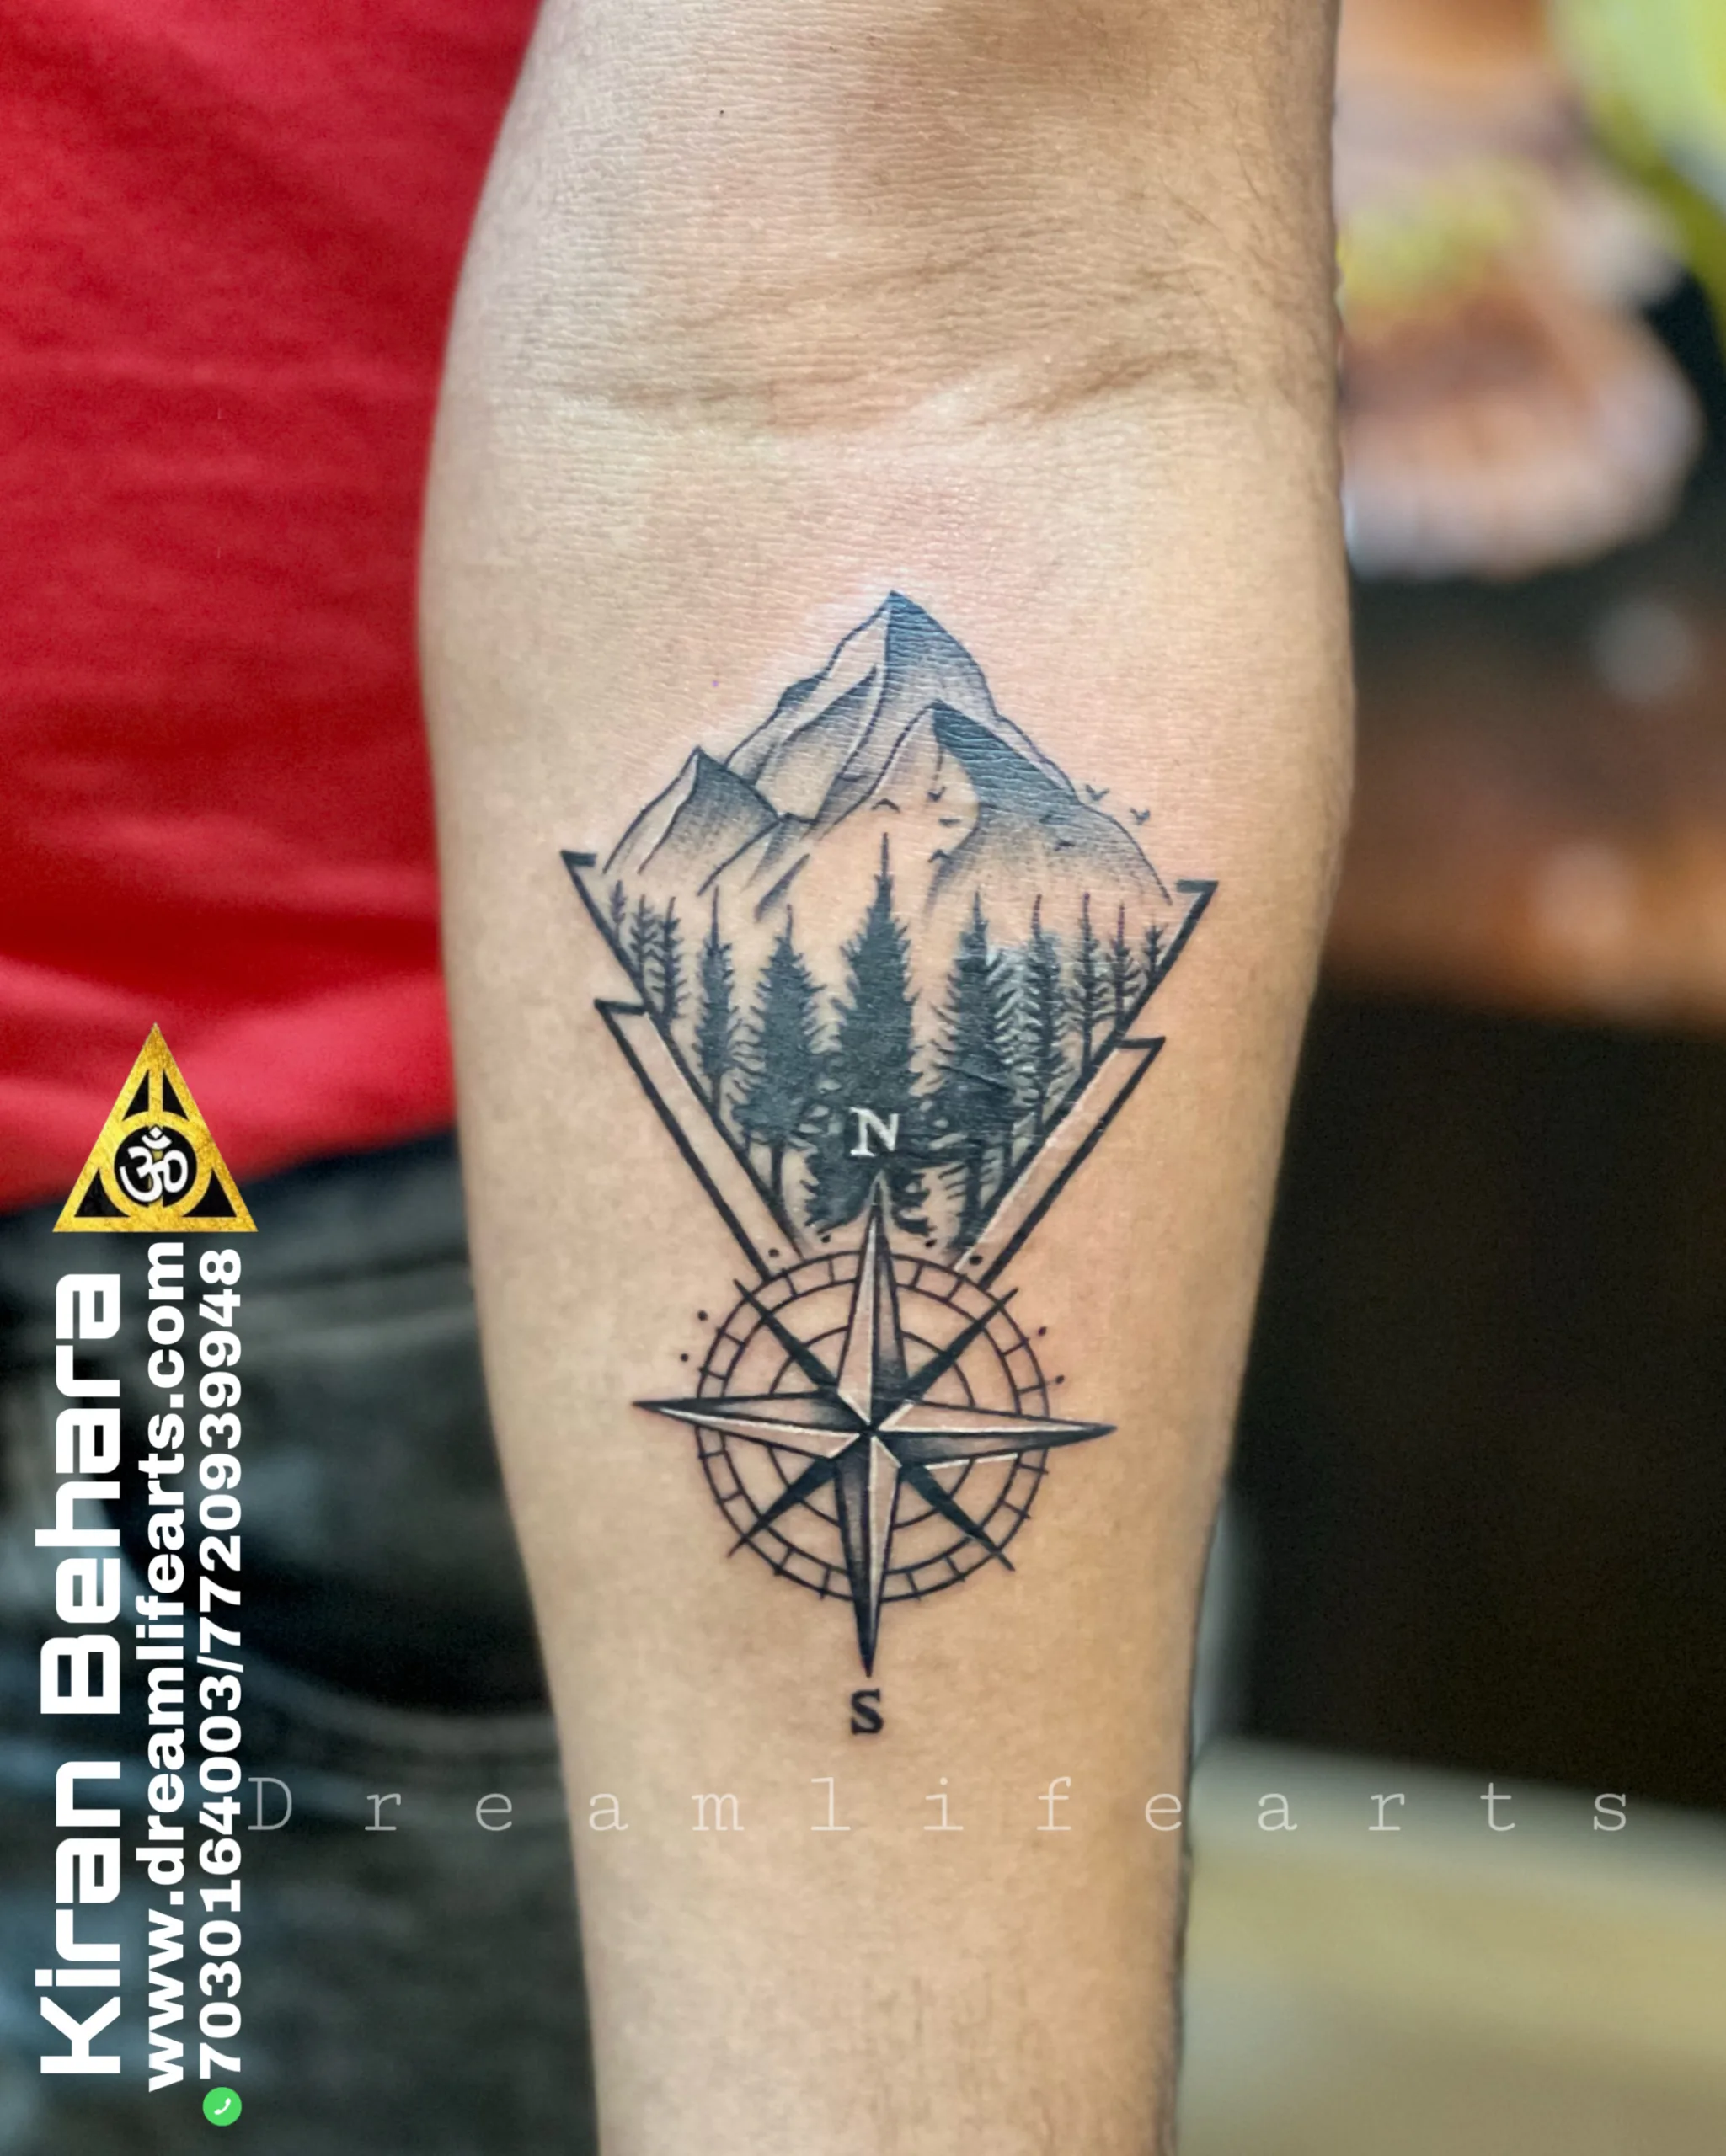 Compass Tattoo Designs: Symbolism and Style in Focus